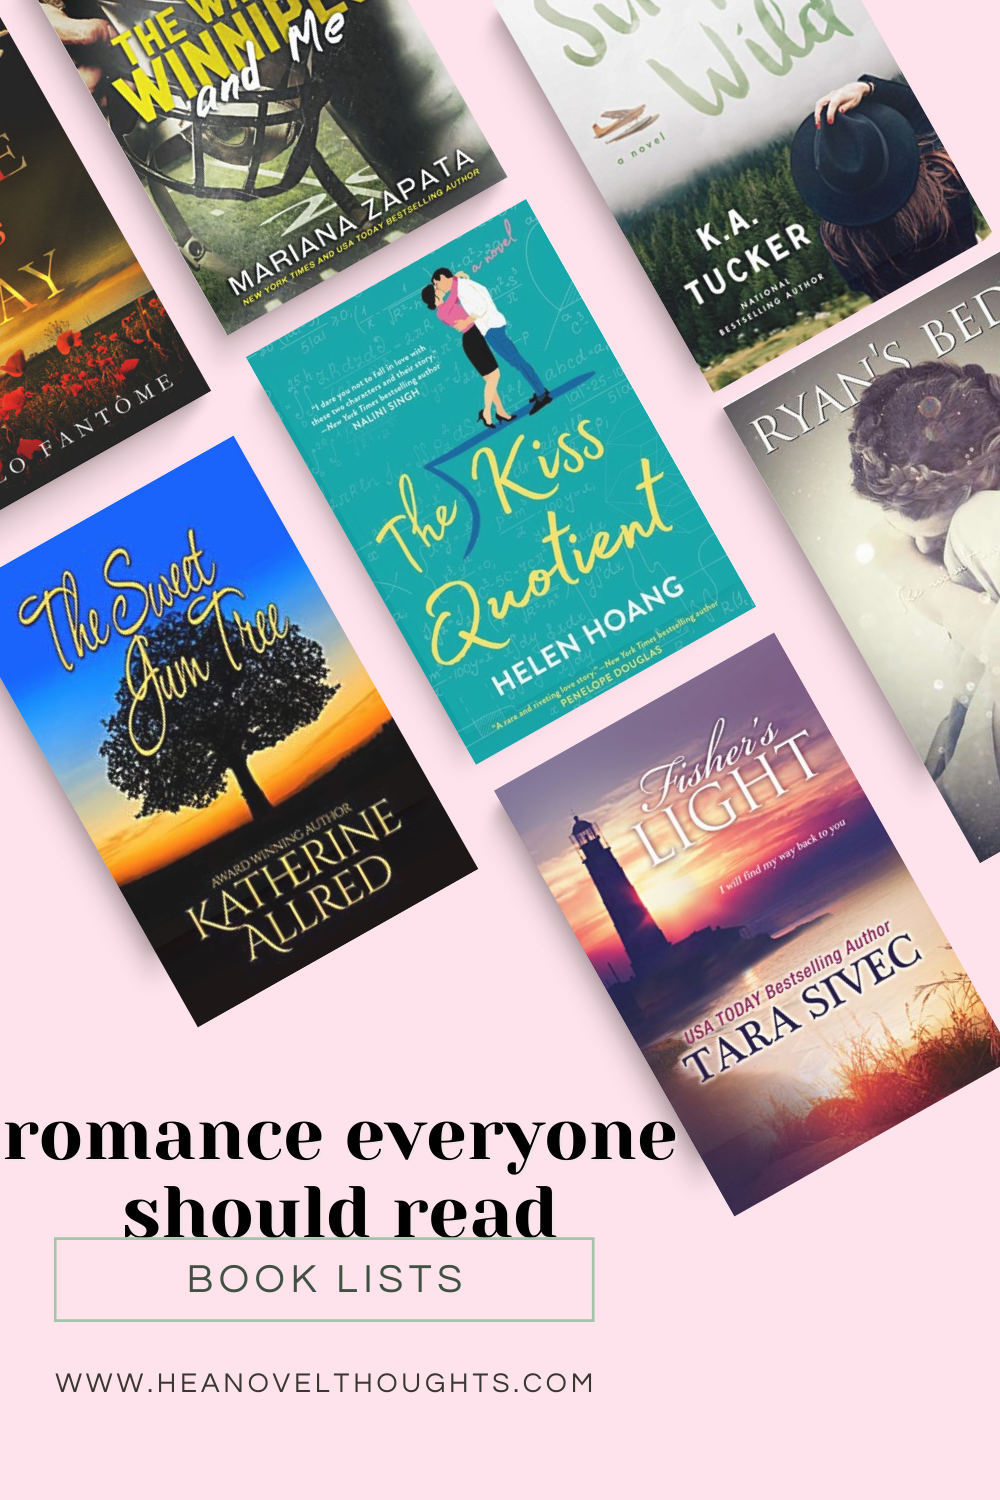 60 College Romance Books So Good They Score an A+ – She Reads Romance Books